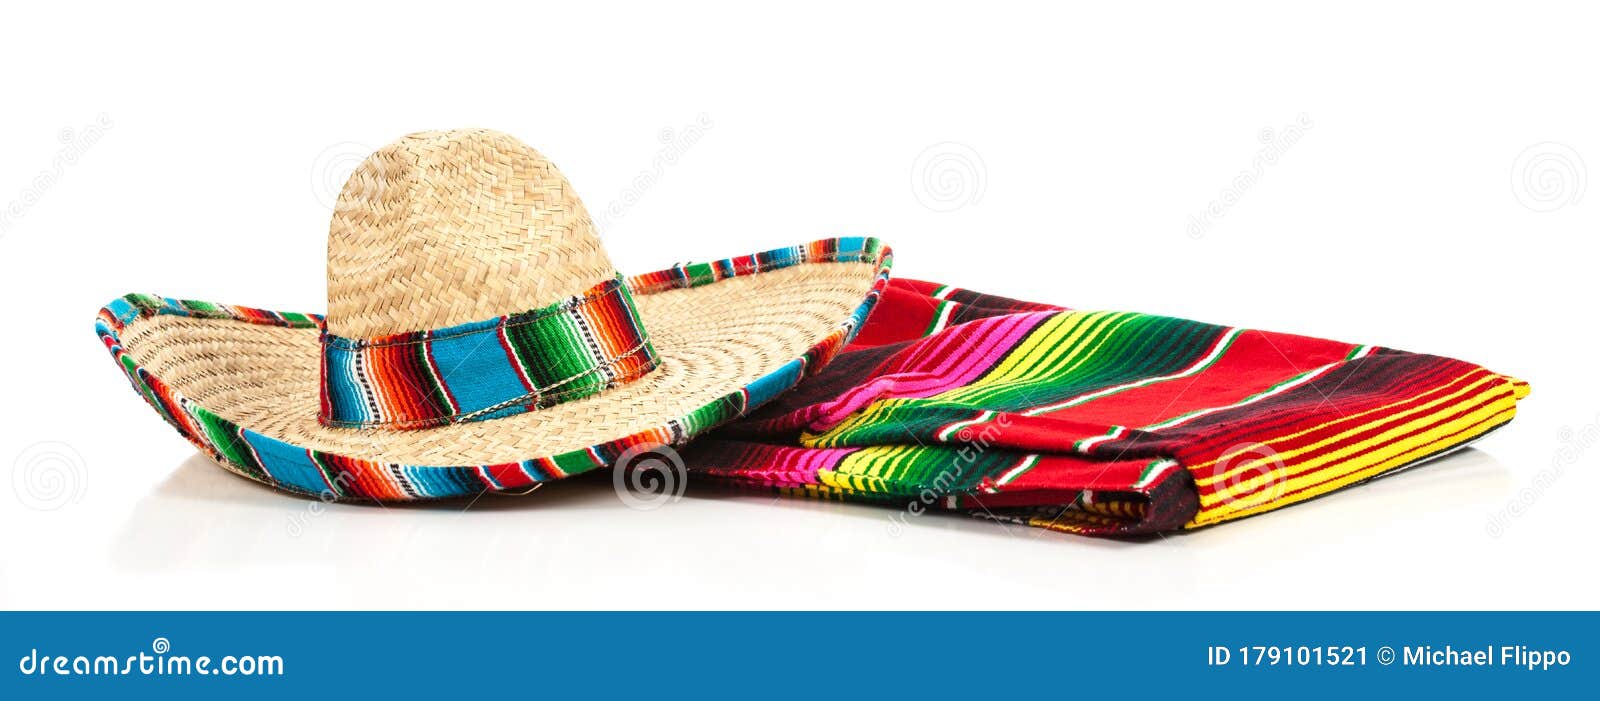 a woven mexican sombrero or hat with a colorful serape blanket